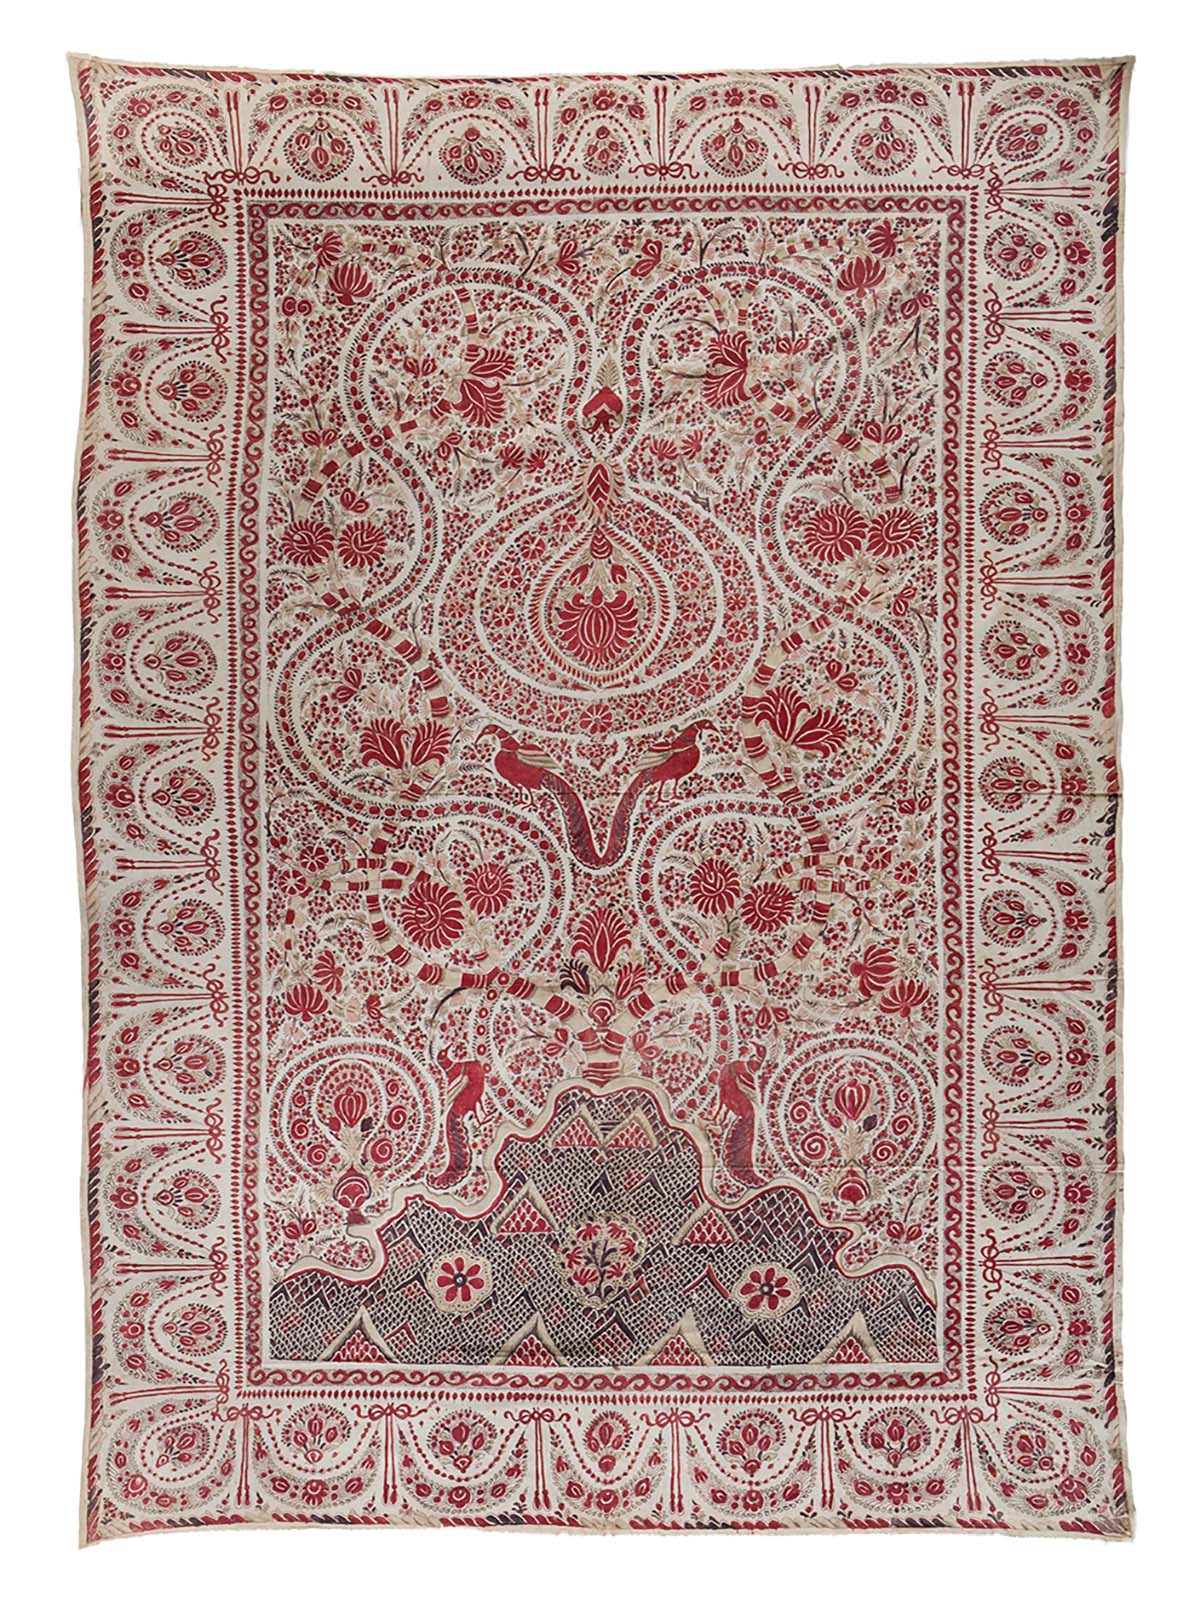 A Palampore textile with a mirrored pattern of birds and floral motifs at the centre and a festoon design on the border.